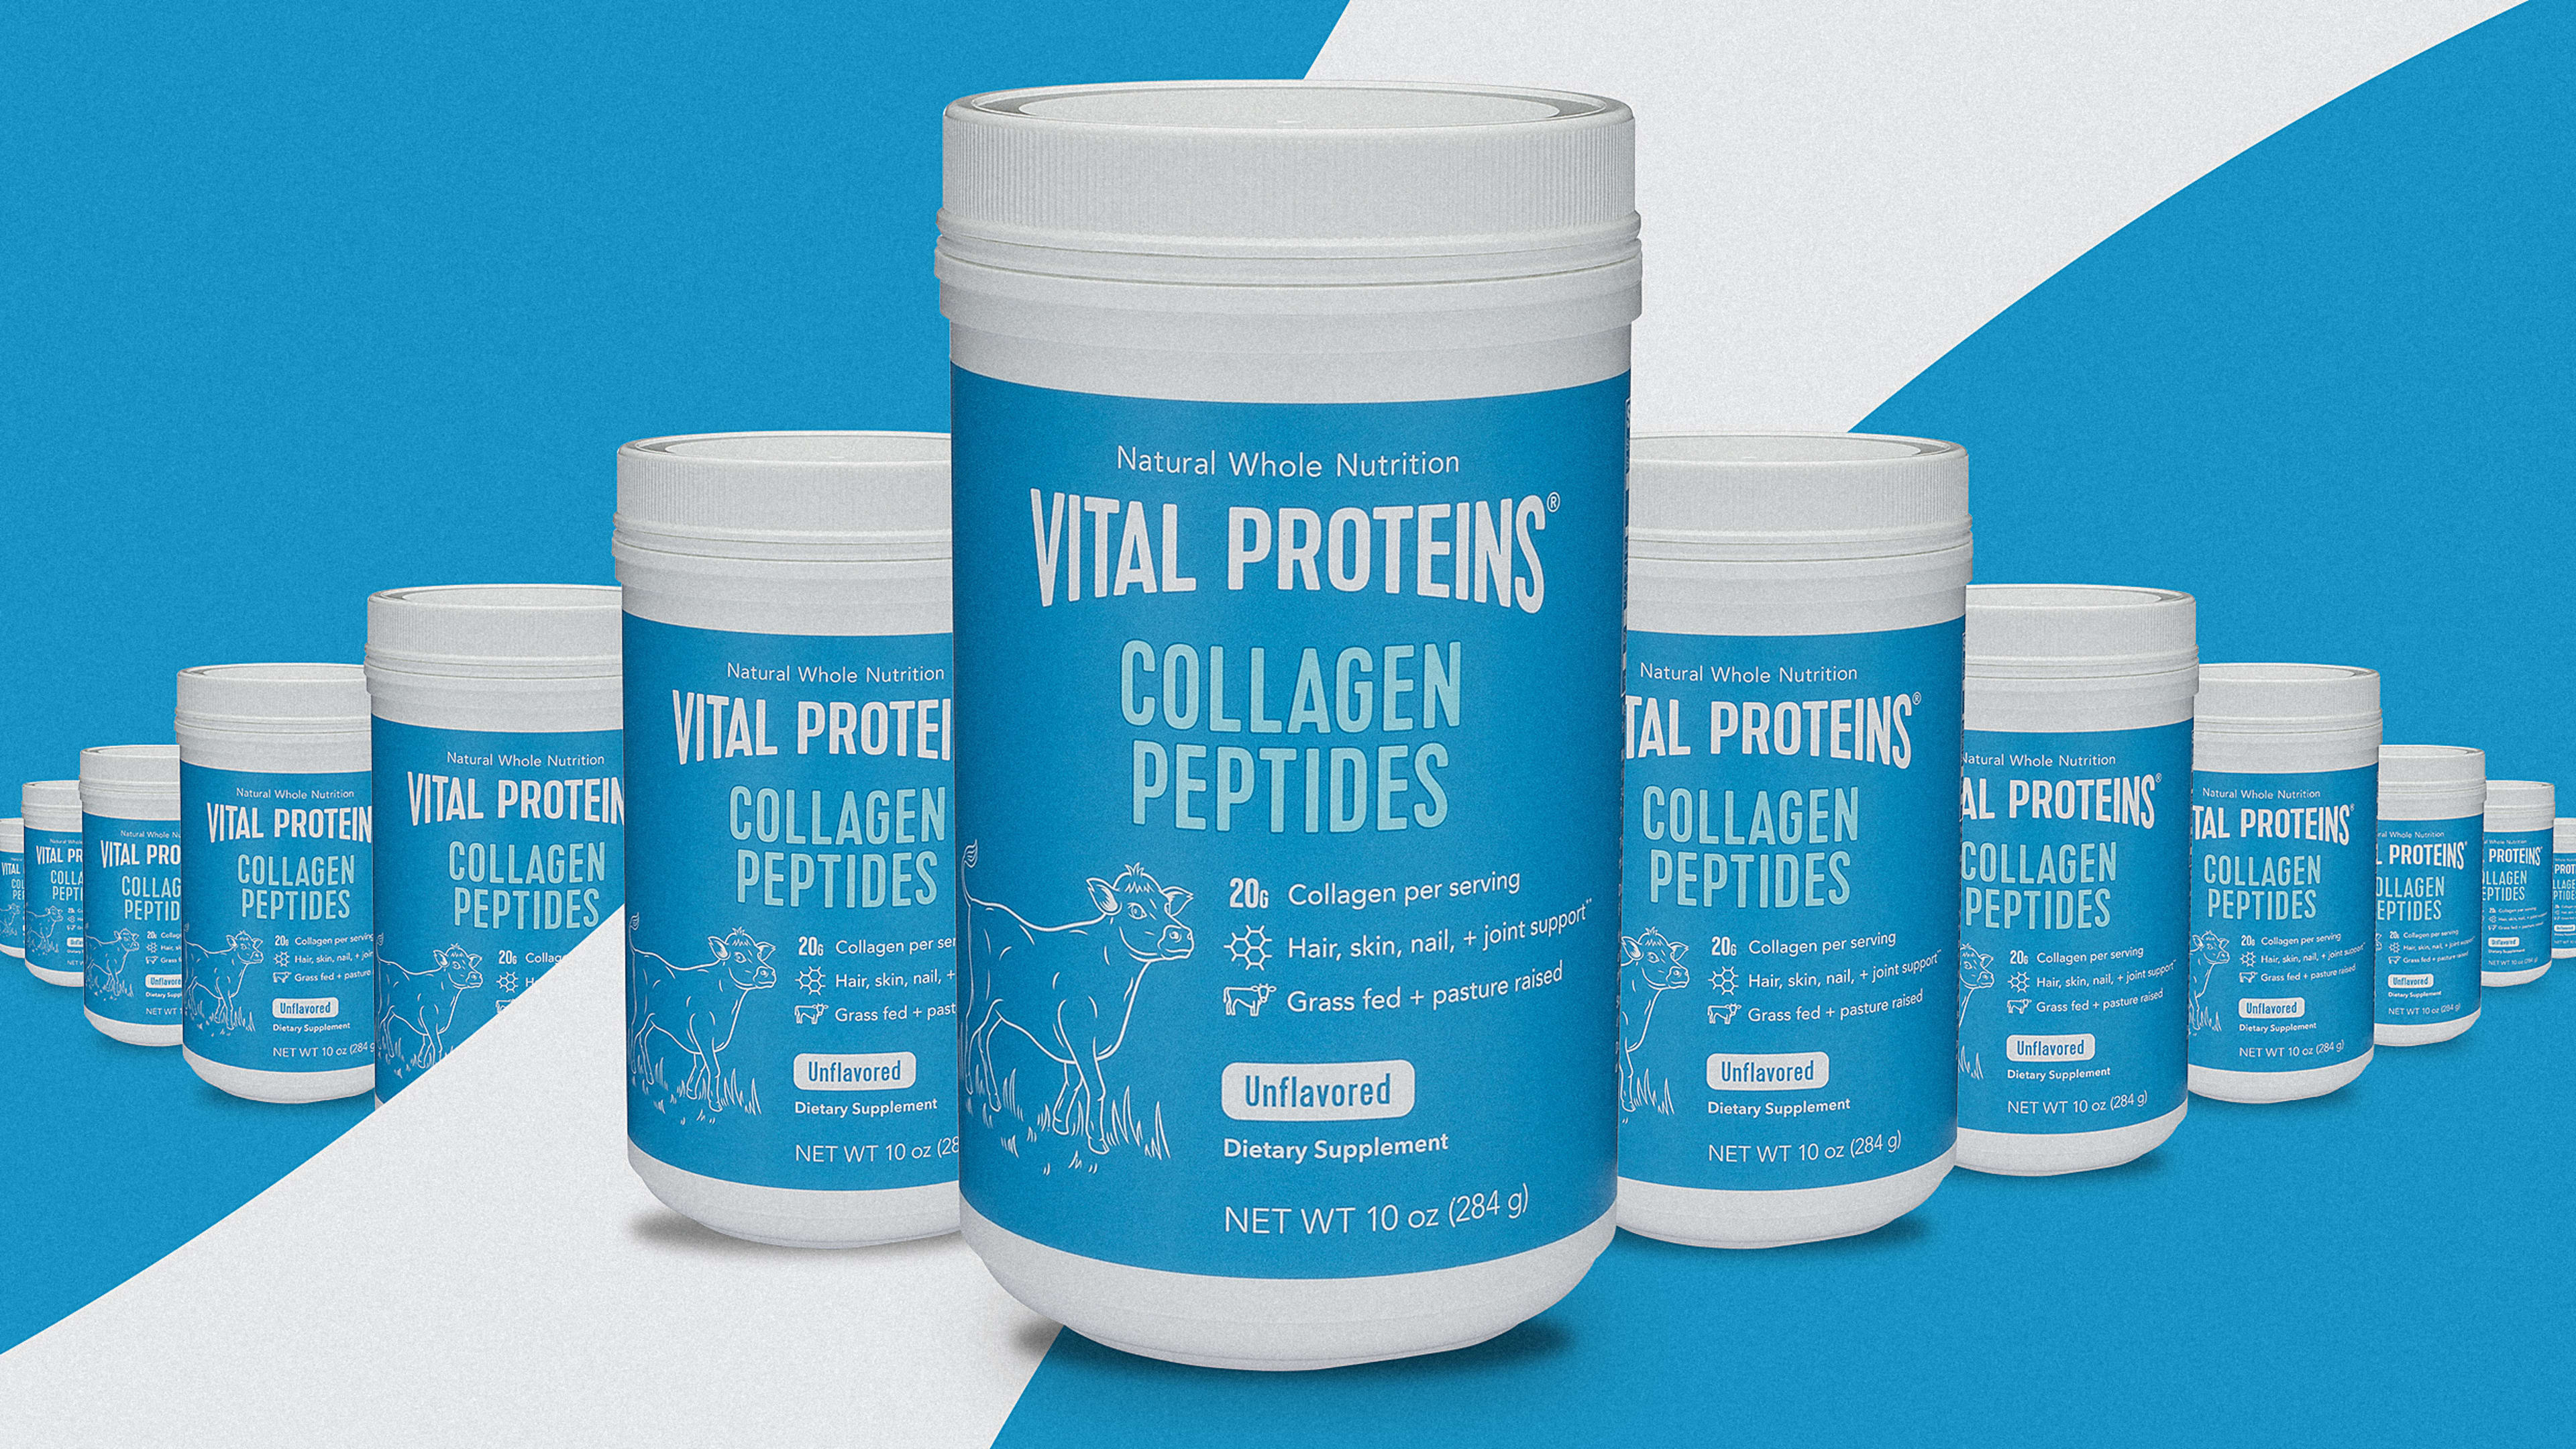 The ingestible beauty boom: How Vital Proteins made collagen cool